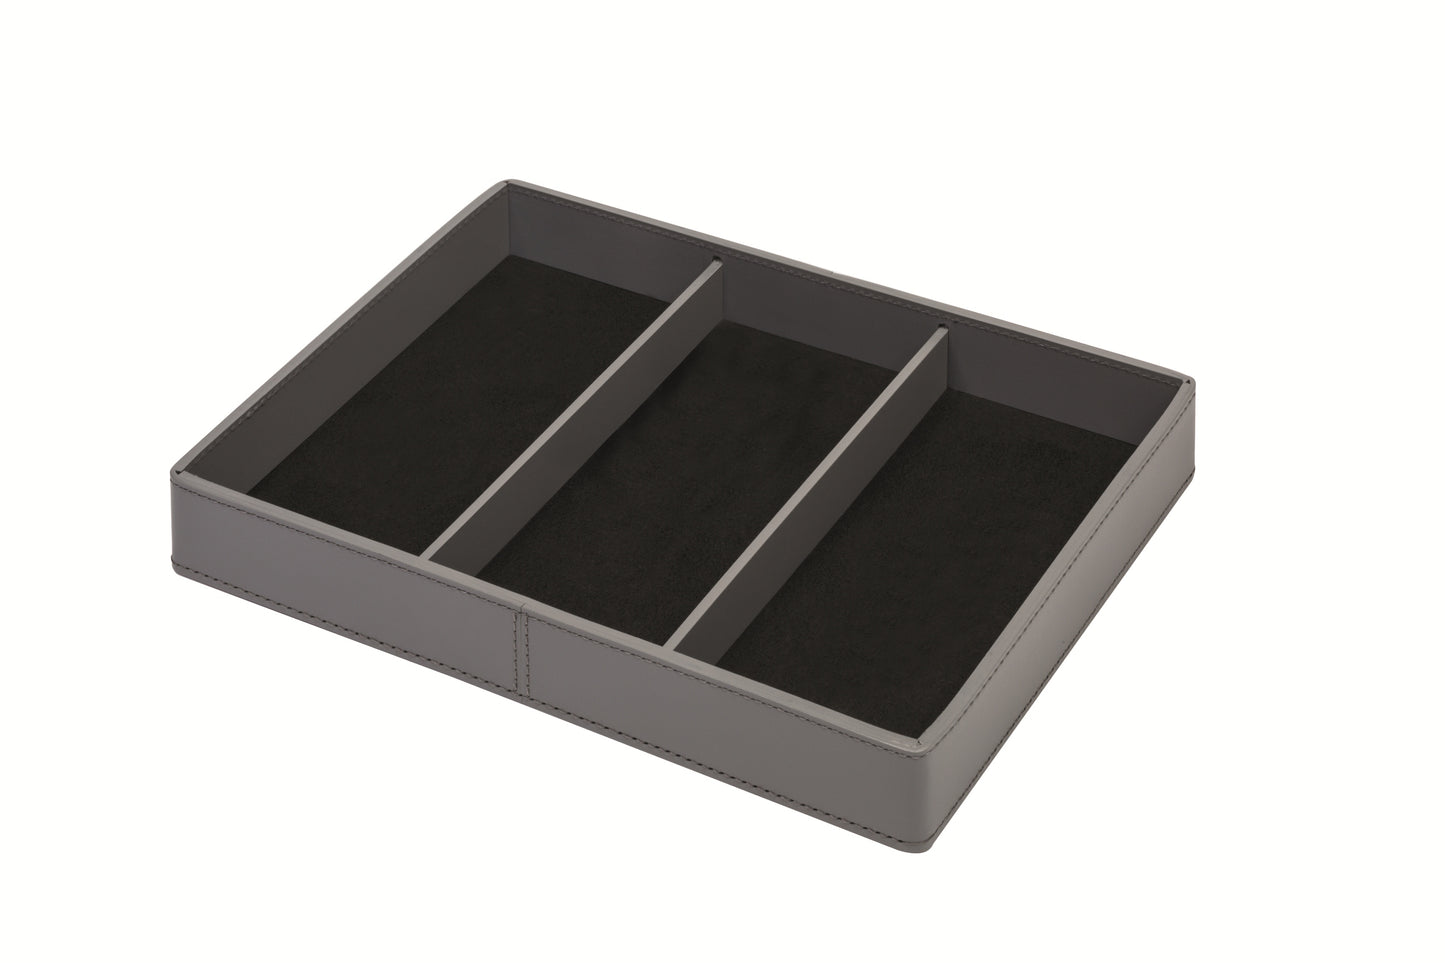 RUDI Narciso Leather Jewelry Tray With Suede Lining | Elegant and Functional Design | Crafted from Finest Leather | Luxurious Suede Lining | Explore a Range of Luxury Home Accessories at 2Jour Concierge, #1 luxury high-end gift & lifestyle shop